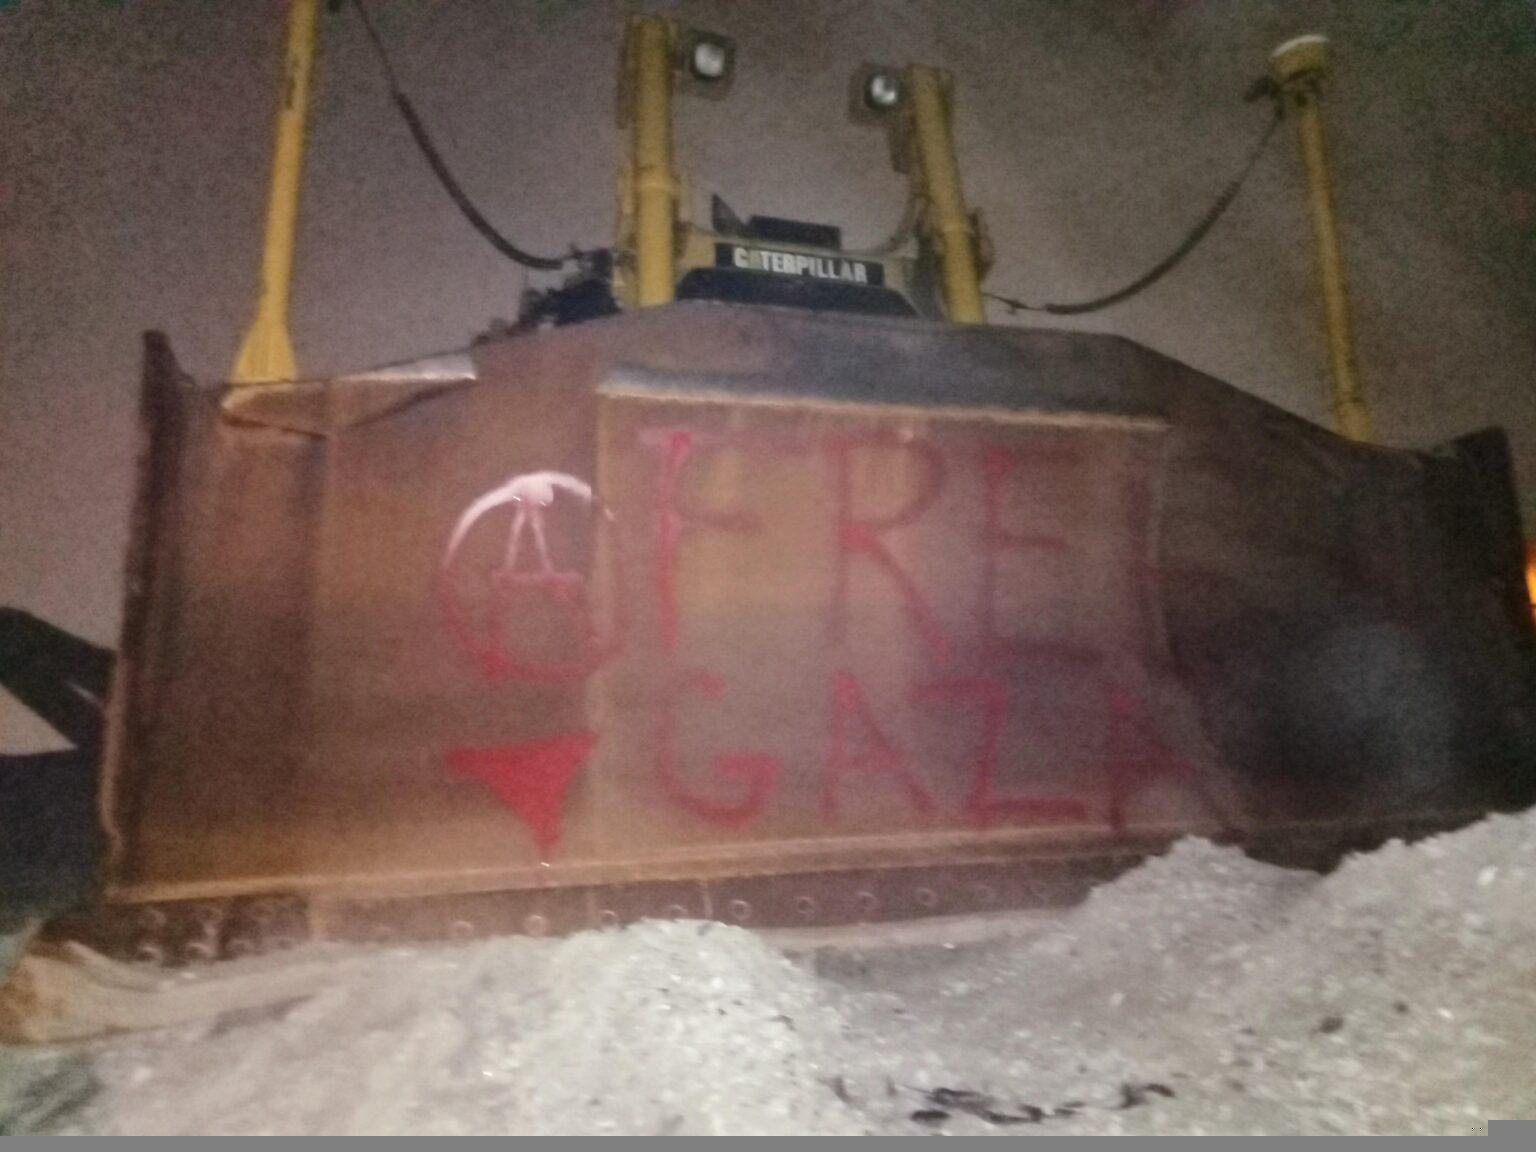 A vandalized CAT machine. Graffiti reads "FREE GAZA". There is also a circle-A and a red downward triangle.